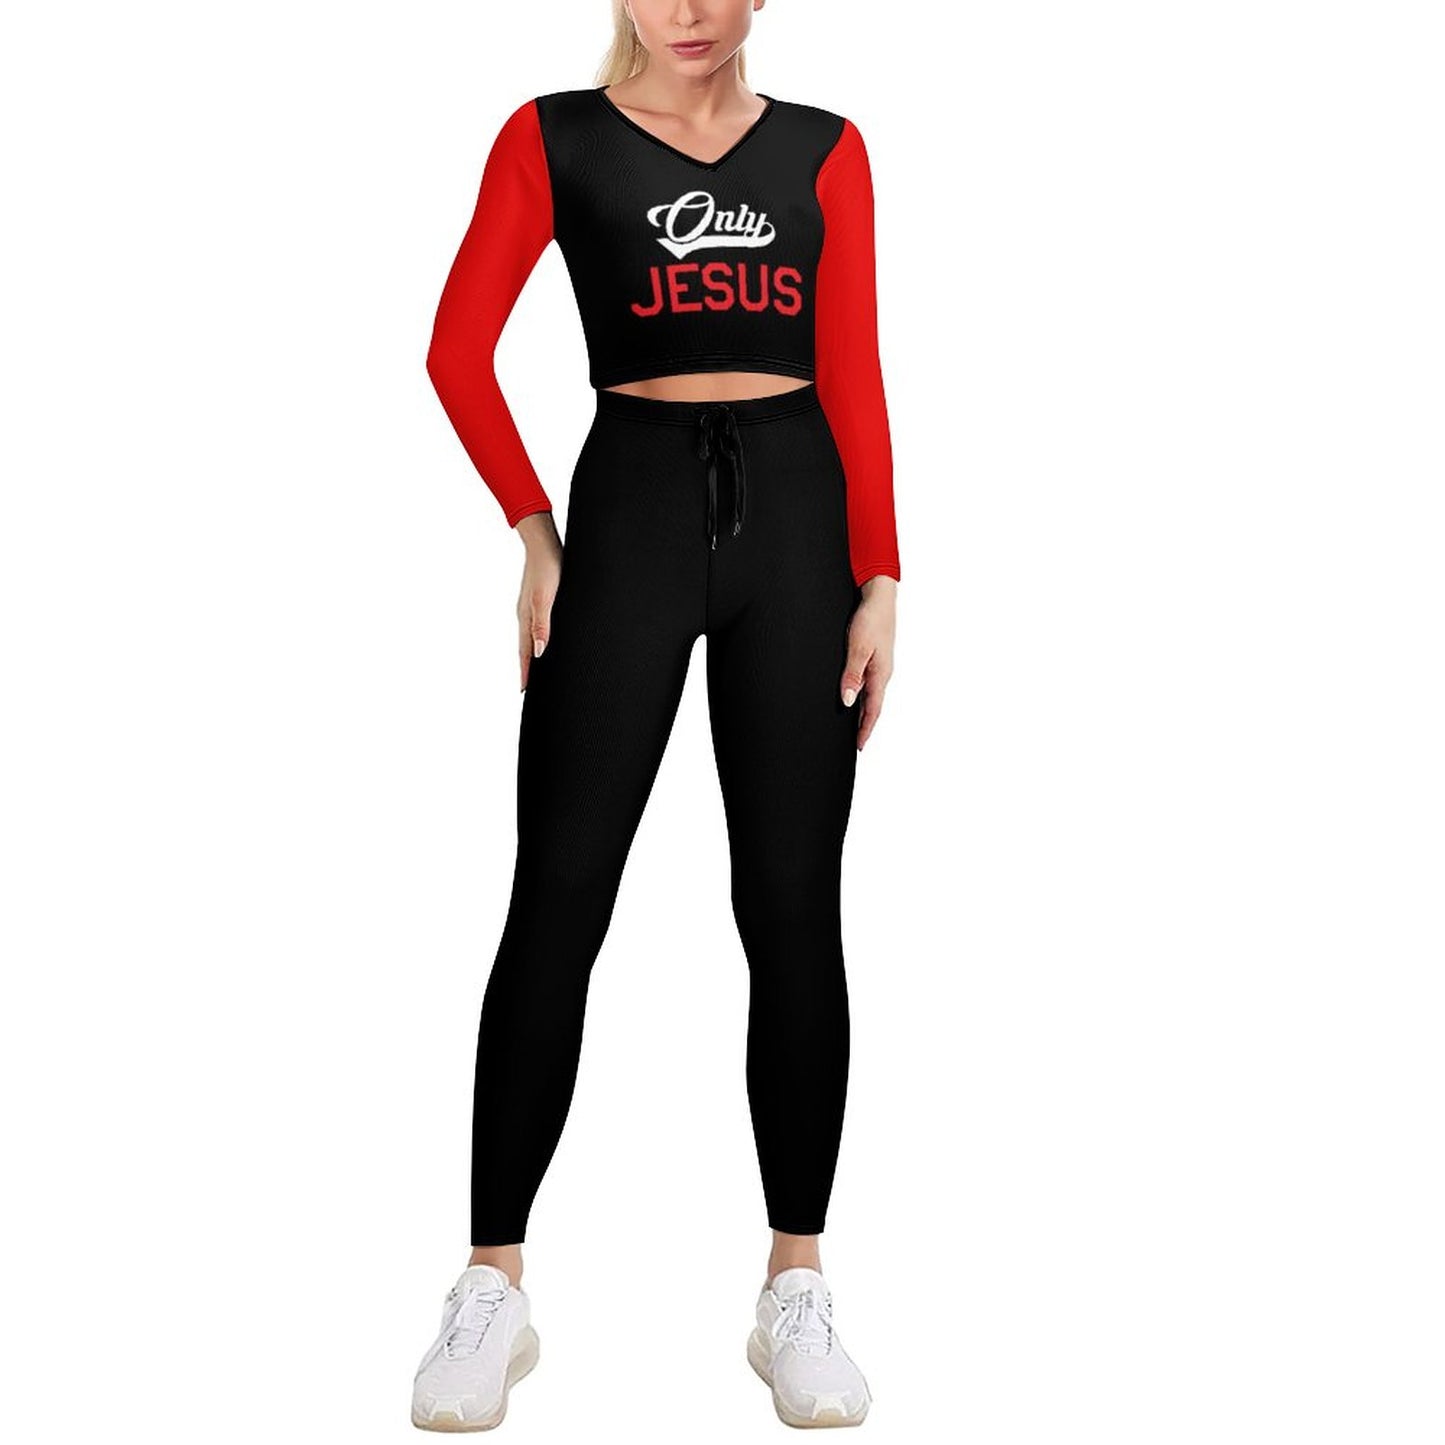 Only Jesus Women's Christian Casual Outfit V neck Sweatshirt Set  SALE-Personal Design